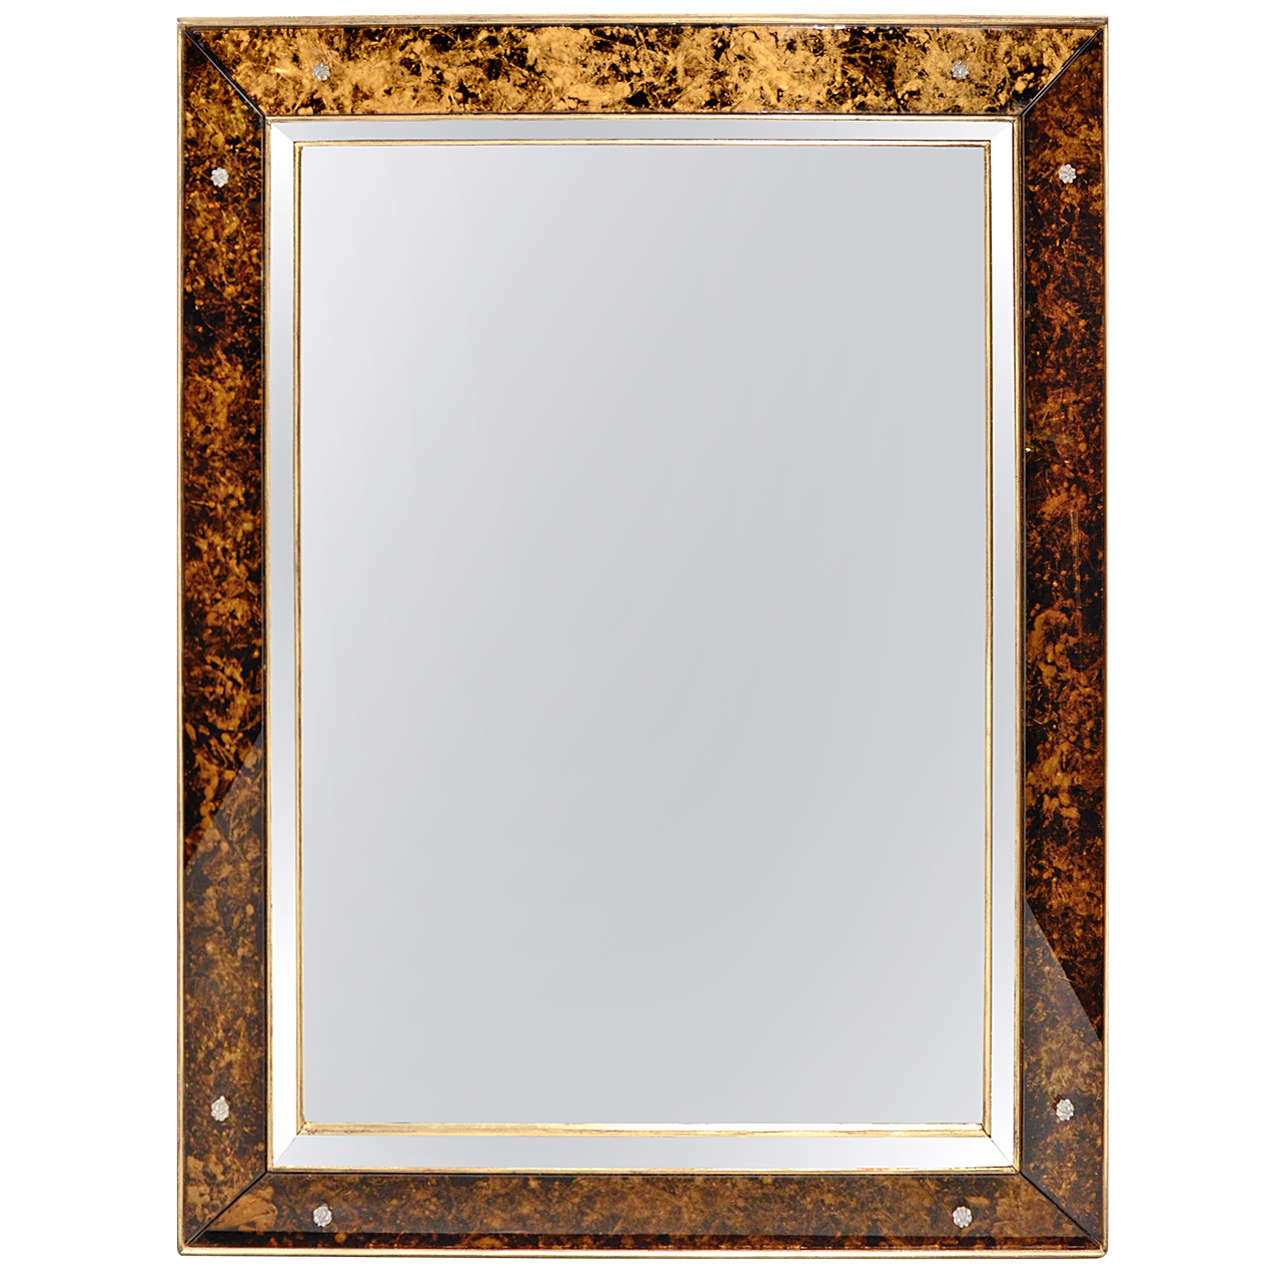 Elegant Mirror with Tortoise Glass Borders and with Shadowbox Design